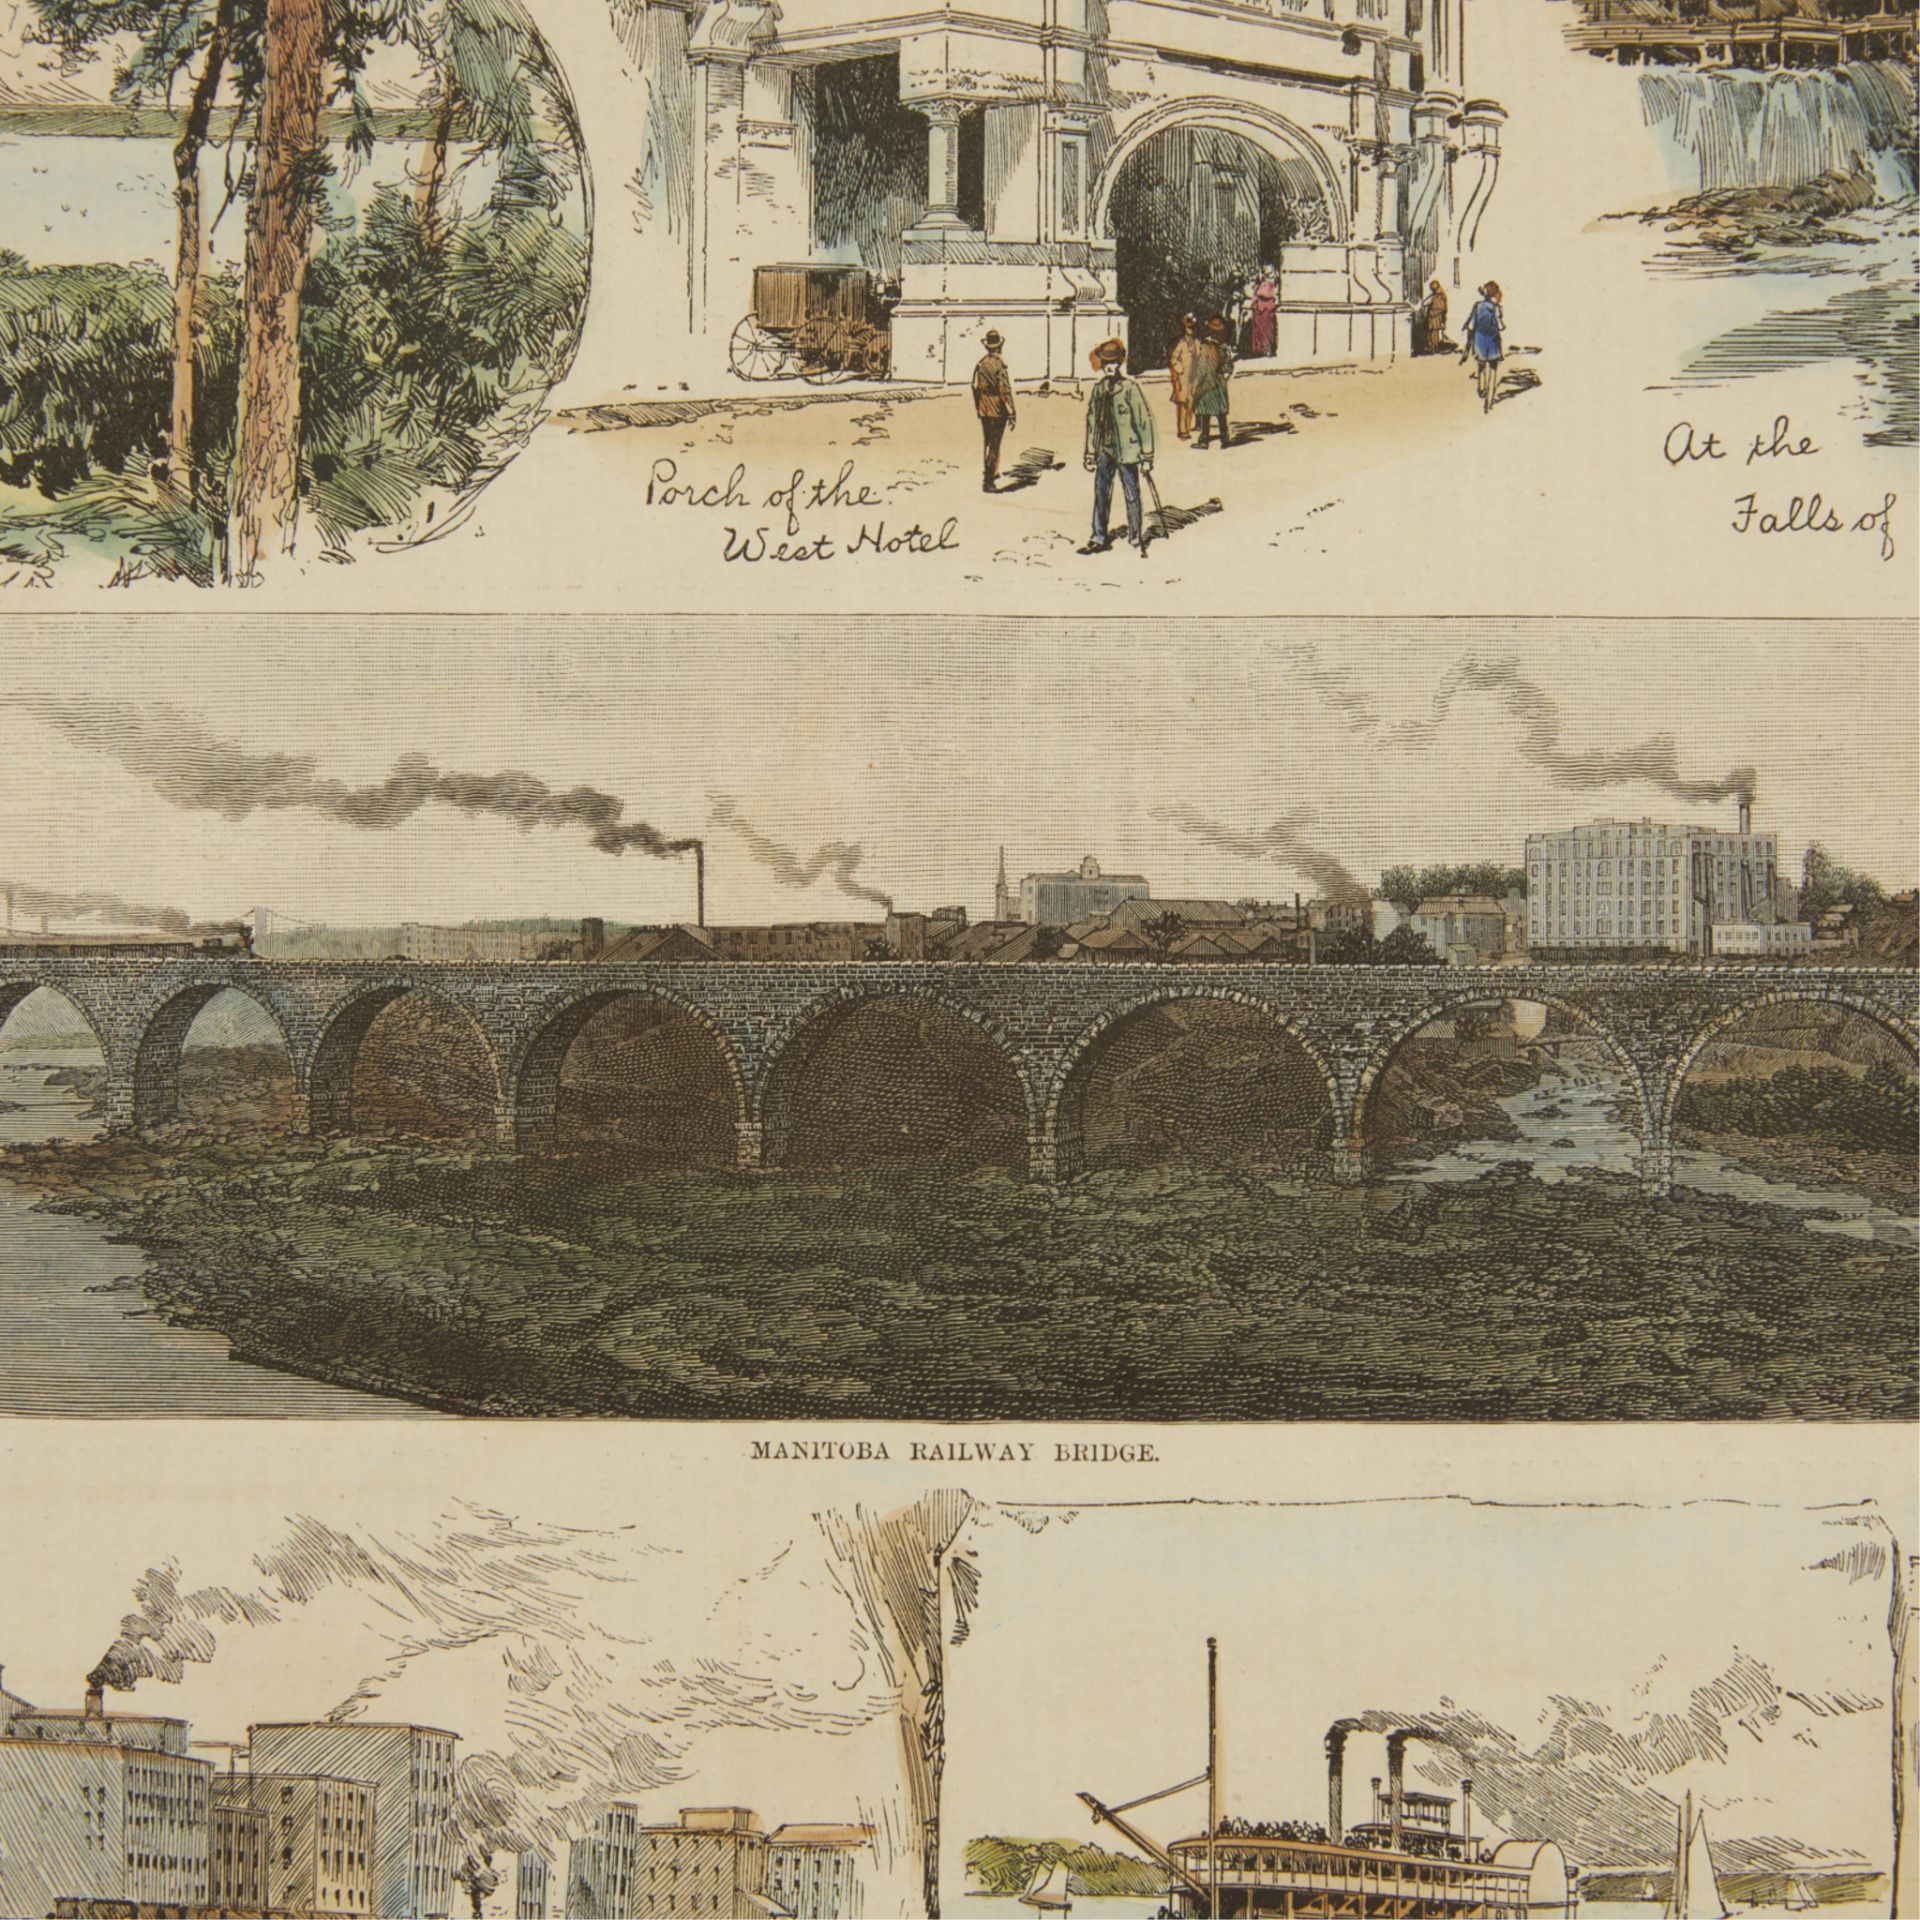 Graham "Sketches from Minneapolis" Harper's Weekly - Image 5 of 10